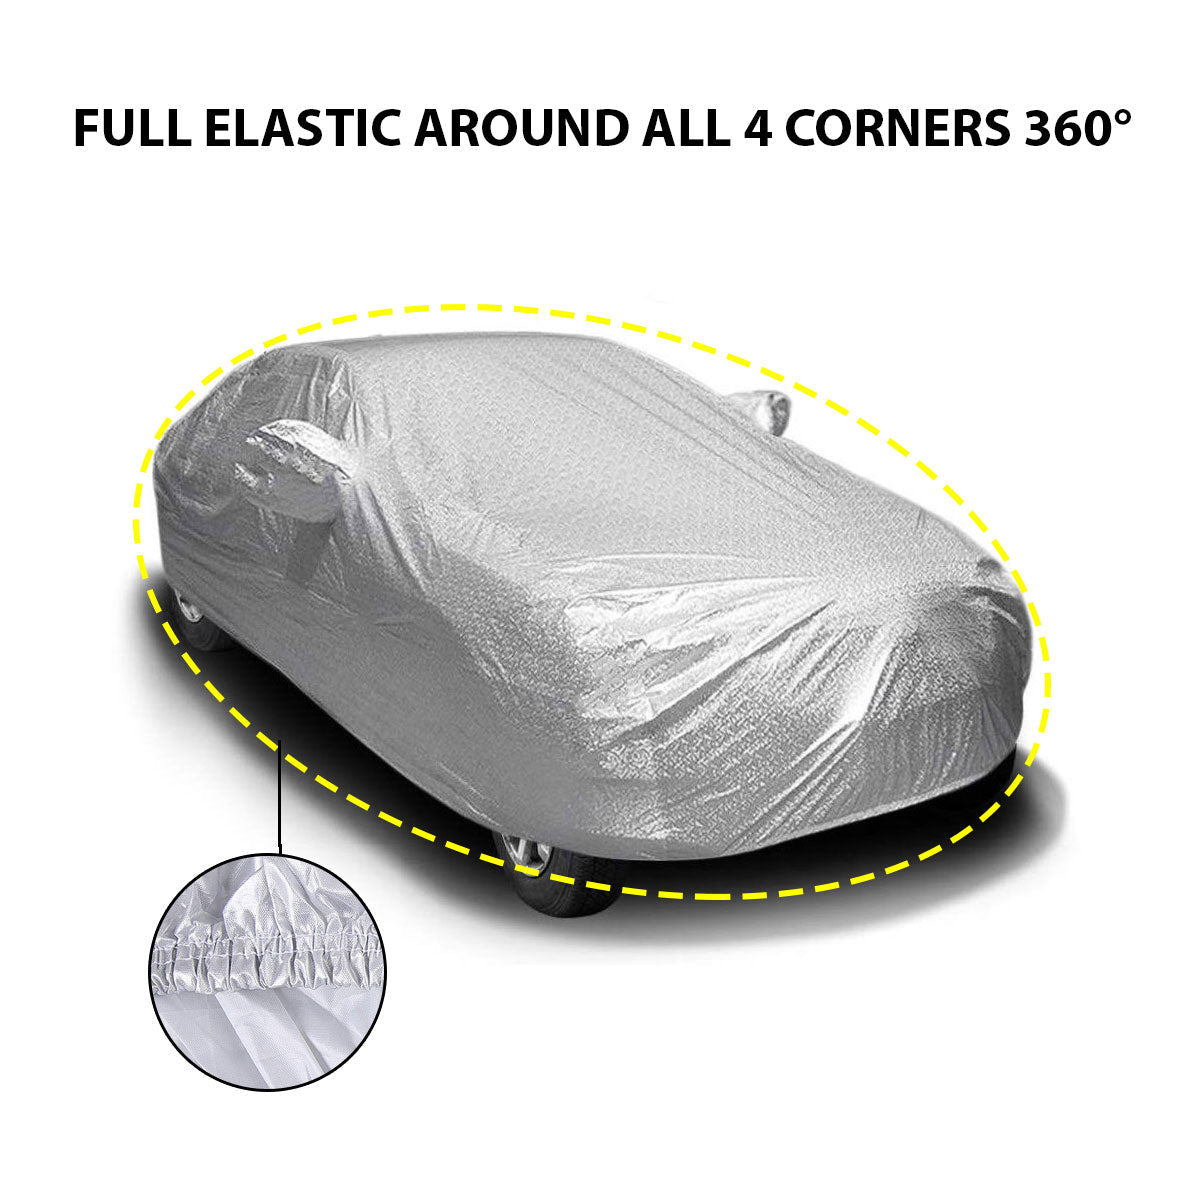 Oshotto Spyro Silver Anti Reflective, dustproof and Water Proof Car Body Cover with Mirror Pockets For Nissan Kicks